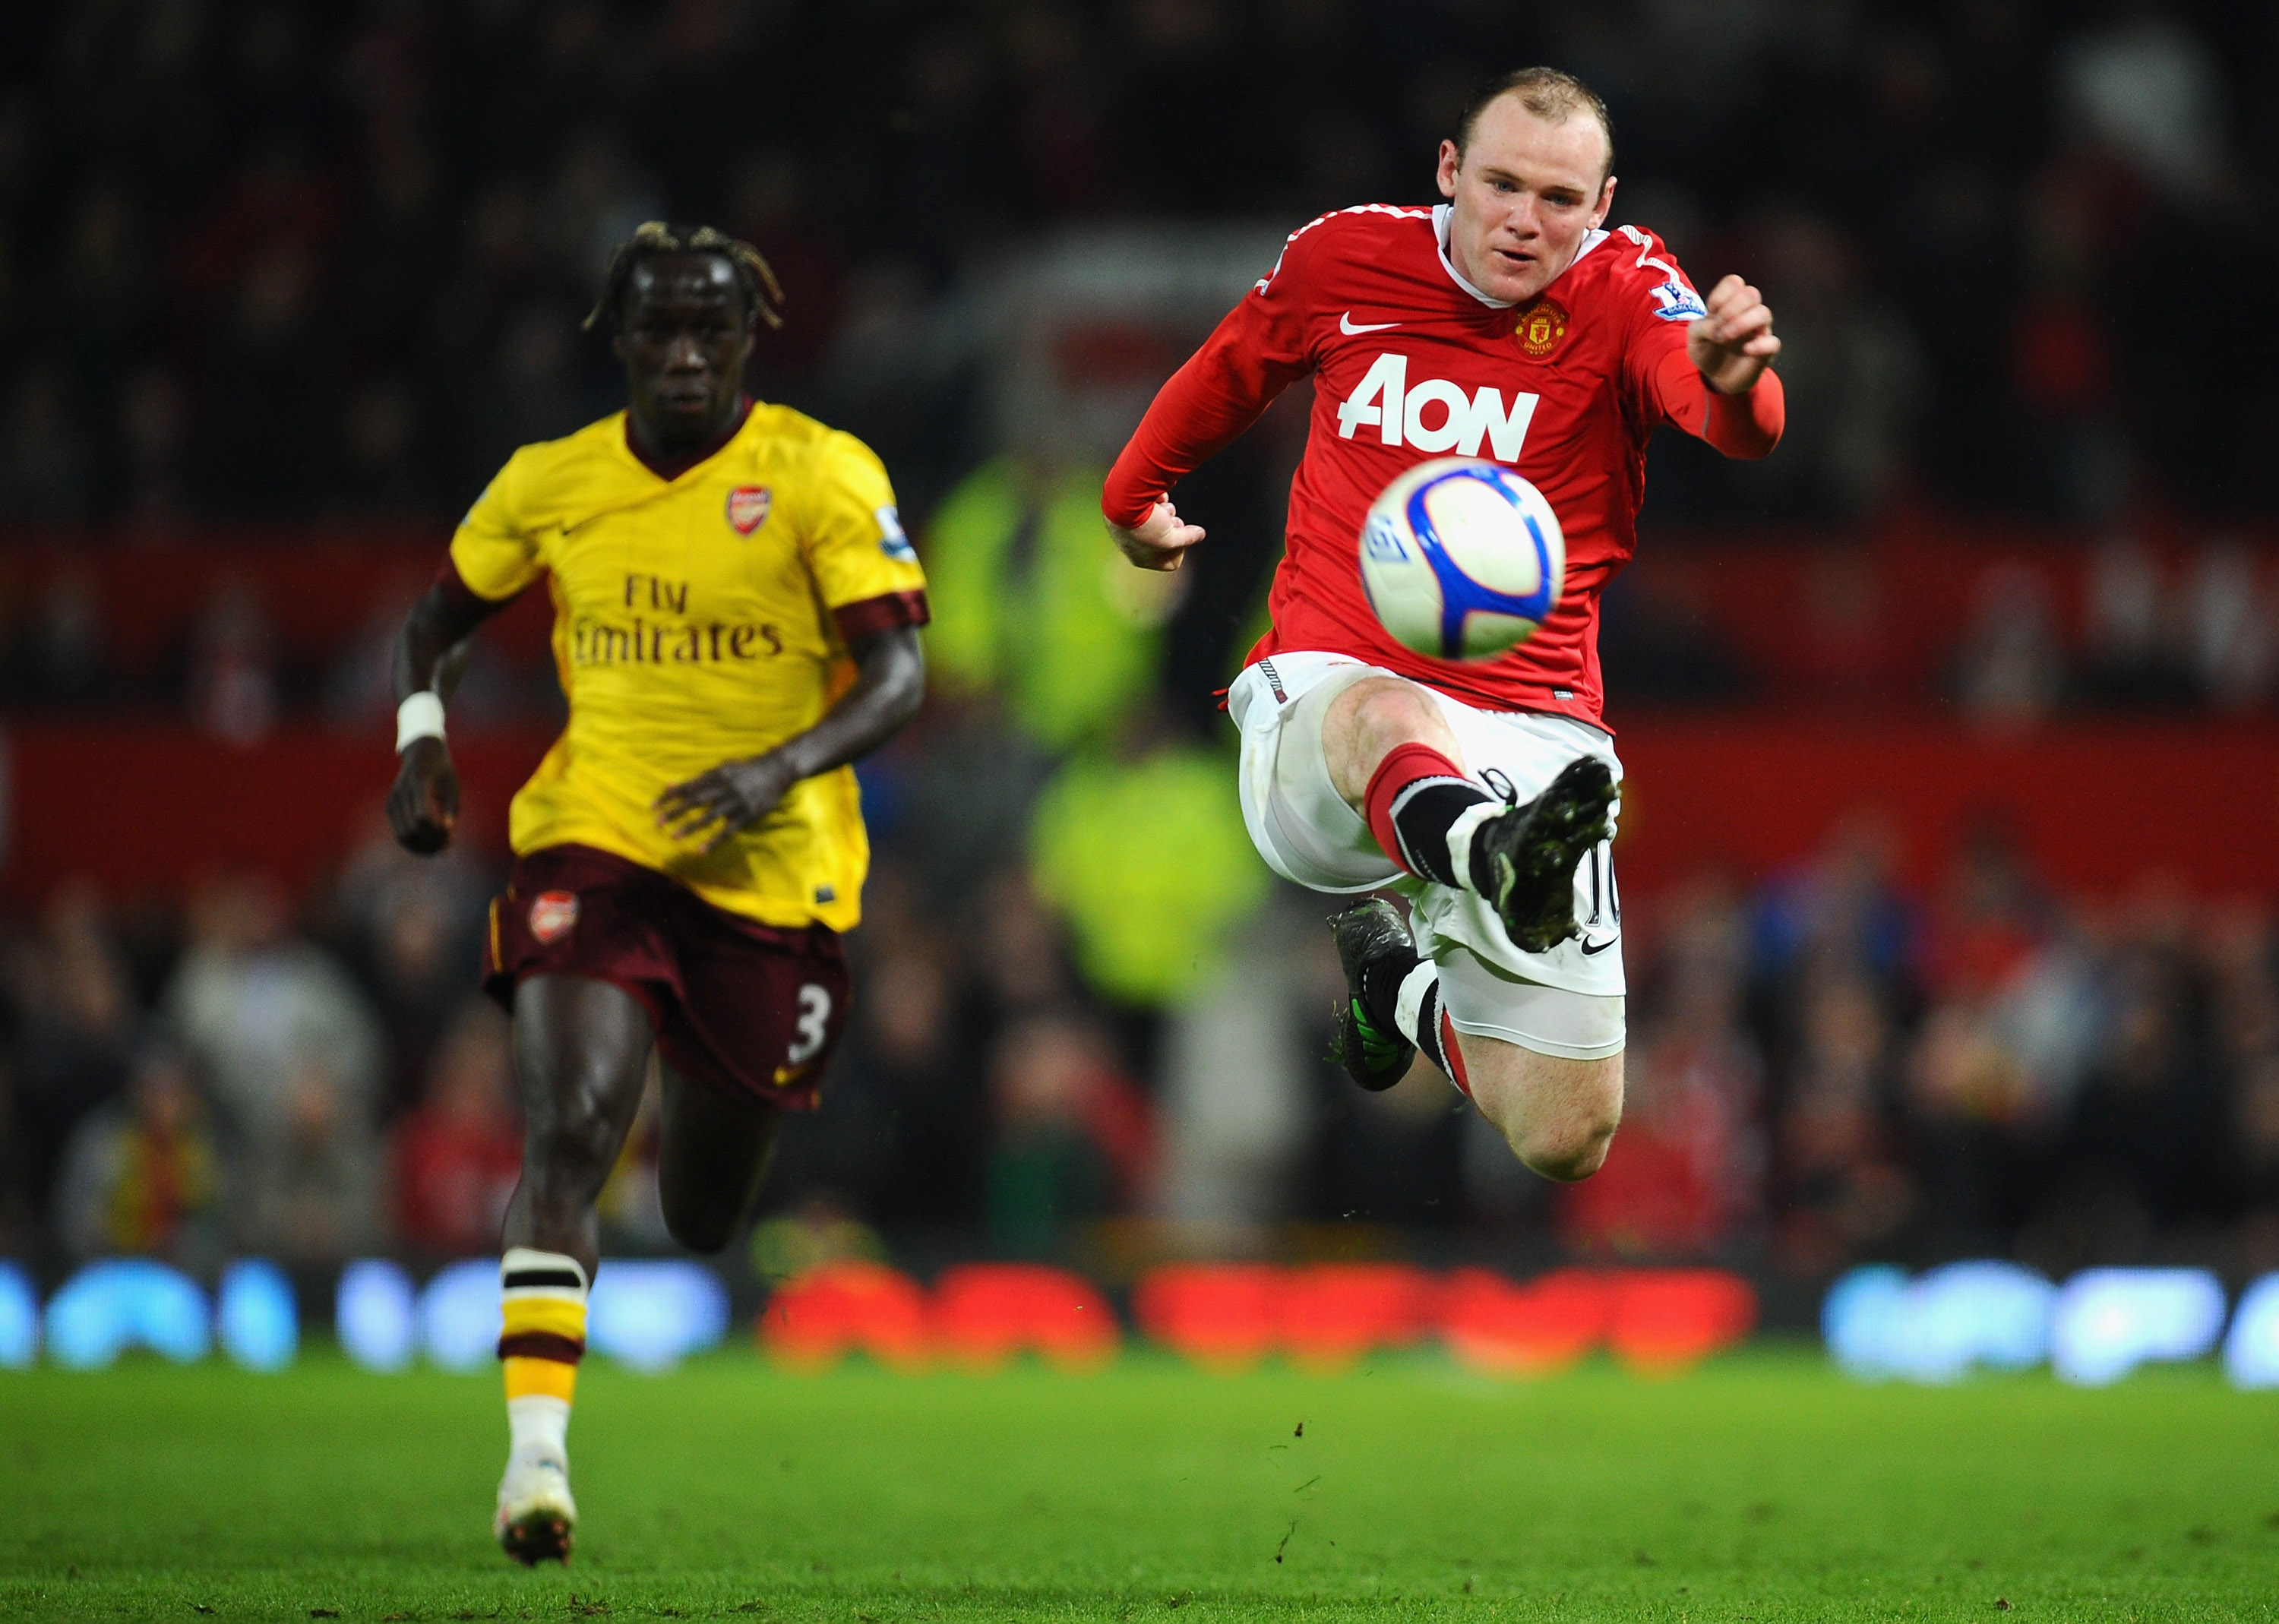 Wayne Rooney's side are well in fron of Bacary Sagna's, but it still could all change